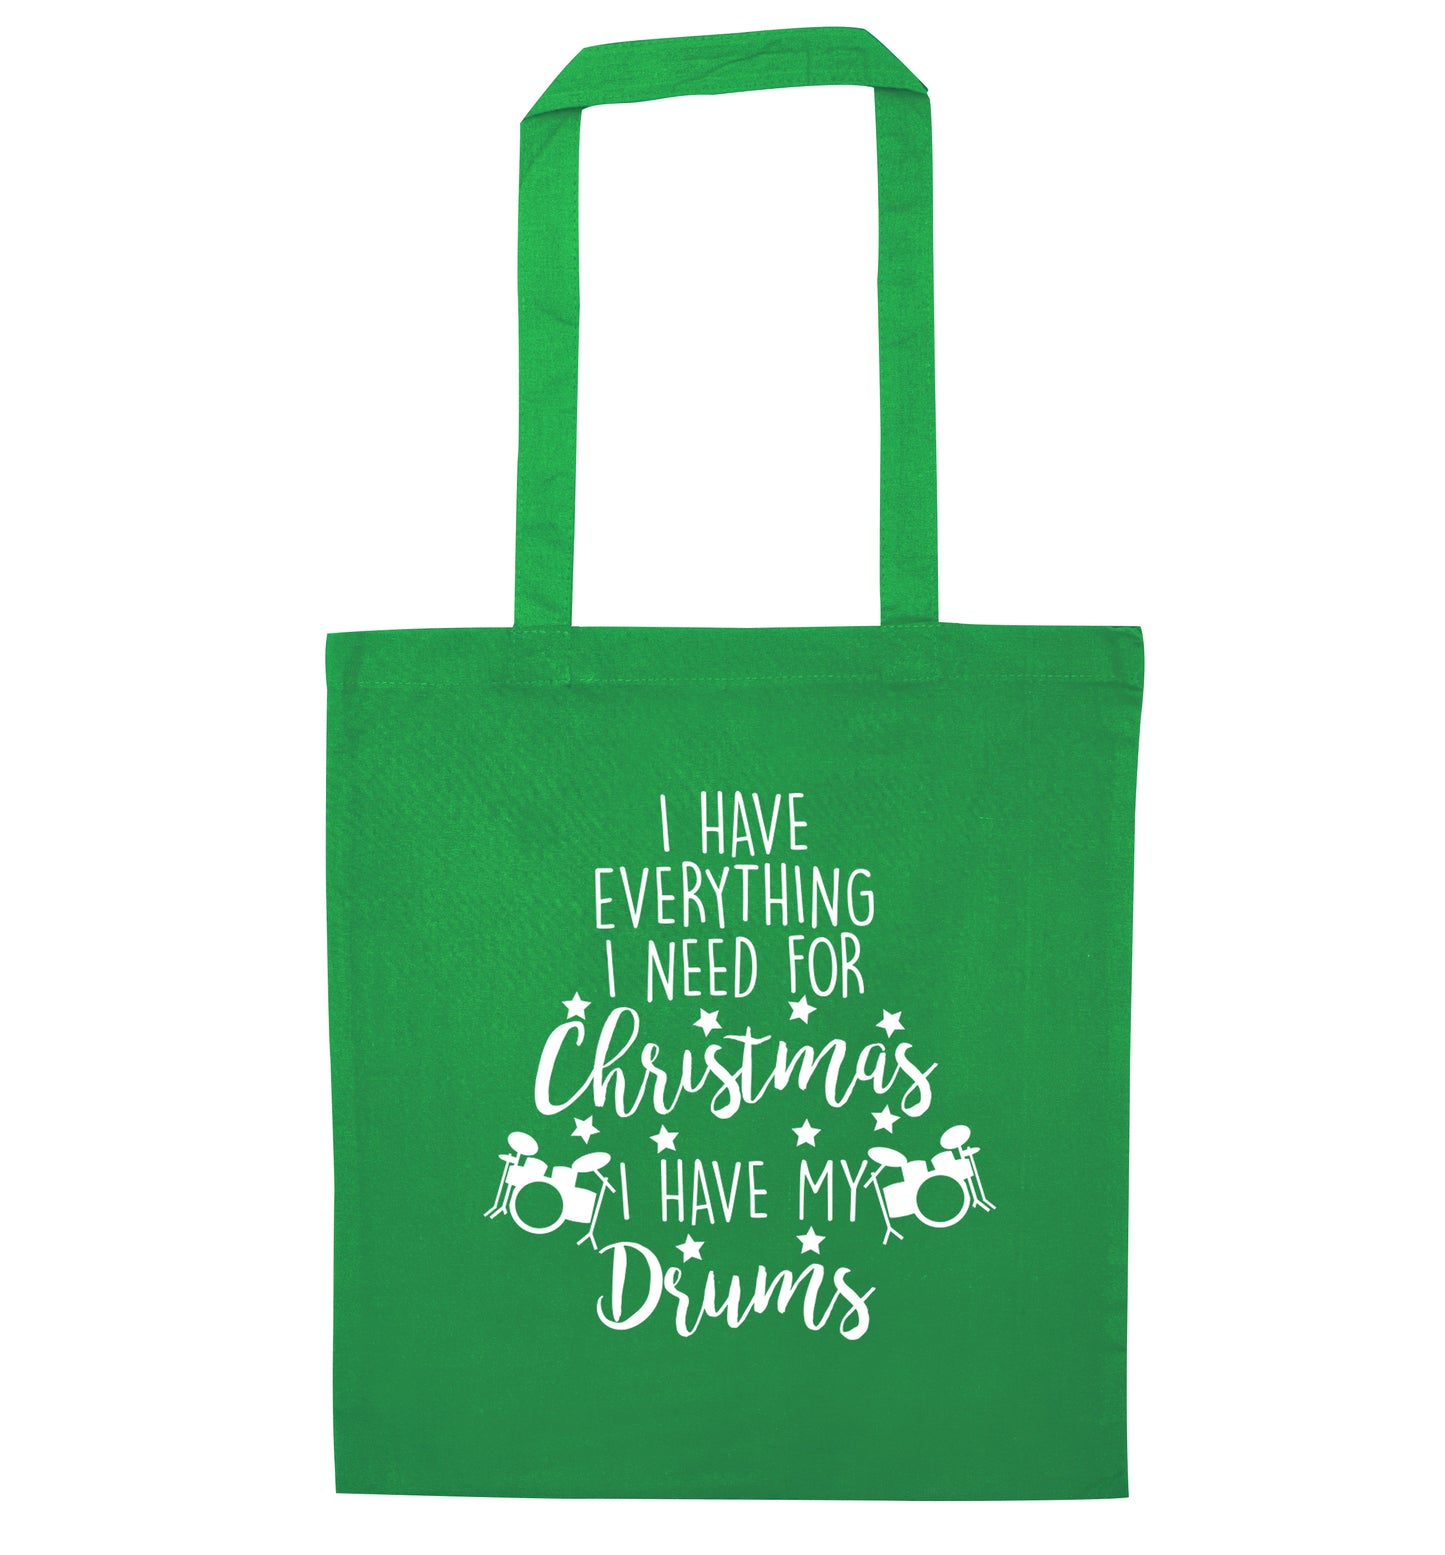 I have everything I need for Christmas I have my drums! green tote bag